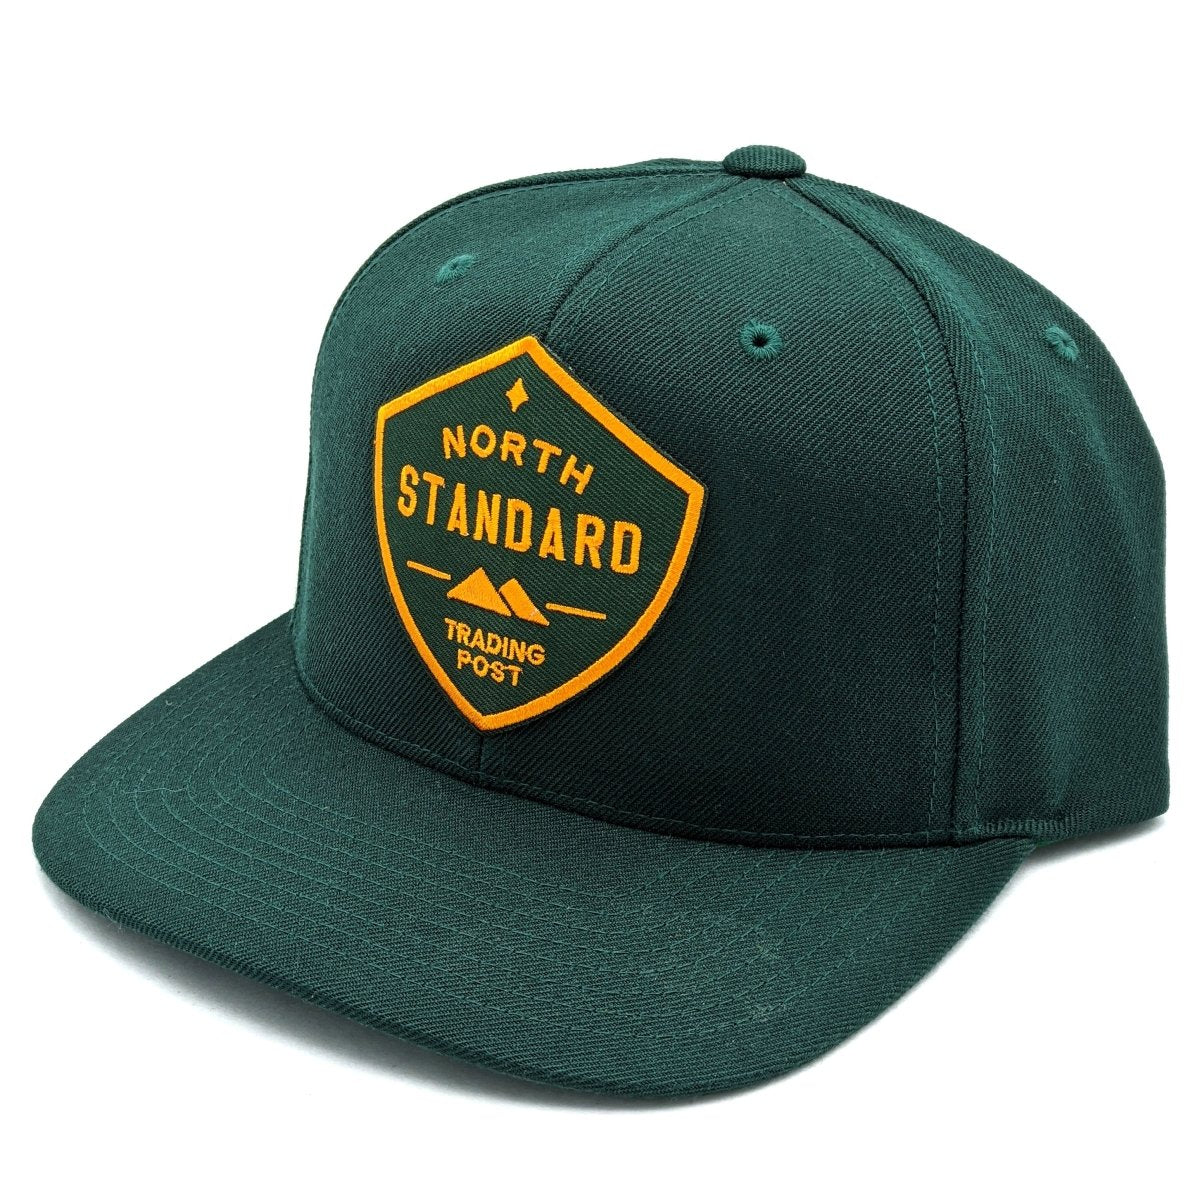 Adult Shield Snapback Hat - Spruce w/Spruce Patch - North Standard Trading Post